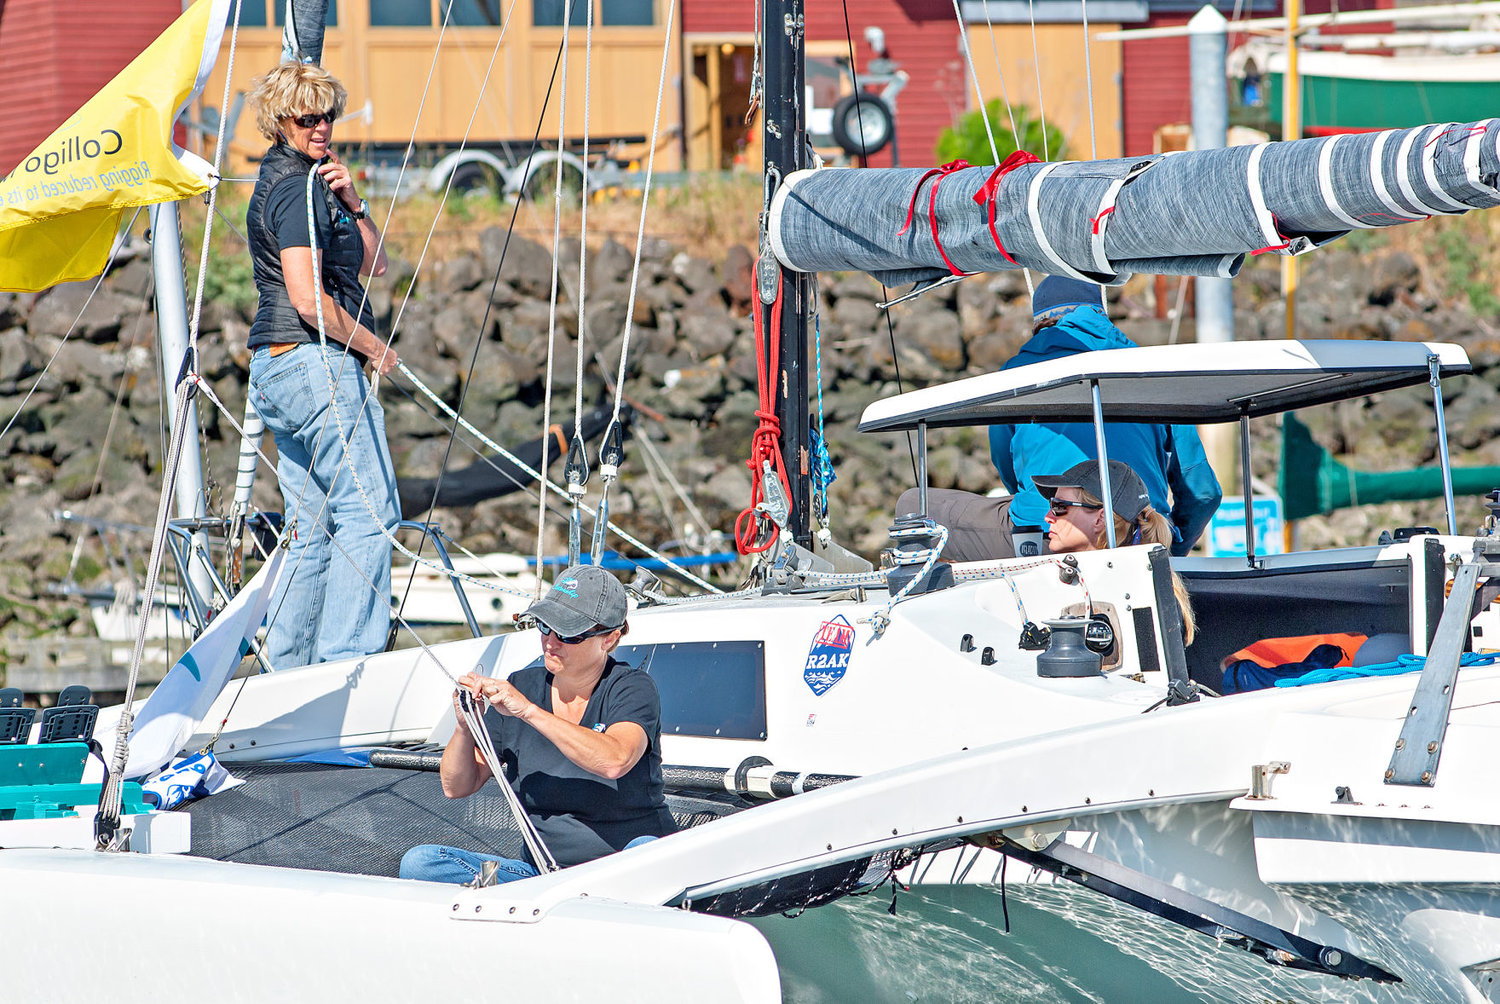 Race to Alaska competitors (from left) Michelle Boroski, Stephanie Maheu and Stephanie York prepare their Corsair F-27 trimaran at the Point Hudson Marina on Tuesday, June 6. The women, along with Johanna Gabbard, are with the Ventura, California–based all-female “Team Sistership.” Boroski, the captain, said they completed the race last year and are trying to improve their time this year. They also raised $8,000 in Northwest Maritime scholarships for women and girls. In the blue jacket is Bob Downes with Brion Toss Yacht Riggers. Boroski lived in Port Townsend for 10 years prior to moving to Ventura and said the team was “way more prepared than we were last year.” Learn more at sistership.org. Photo by Chris Tucker